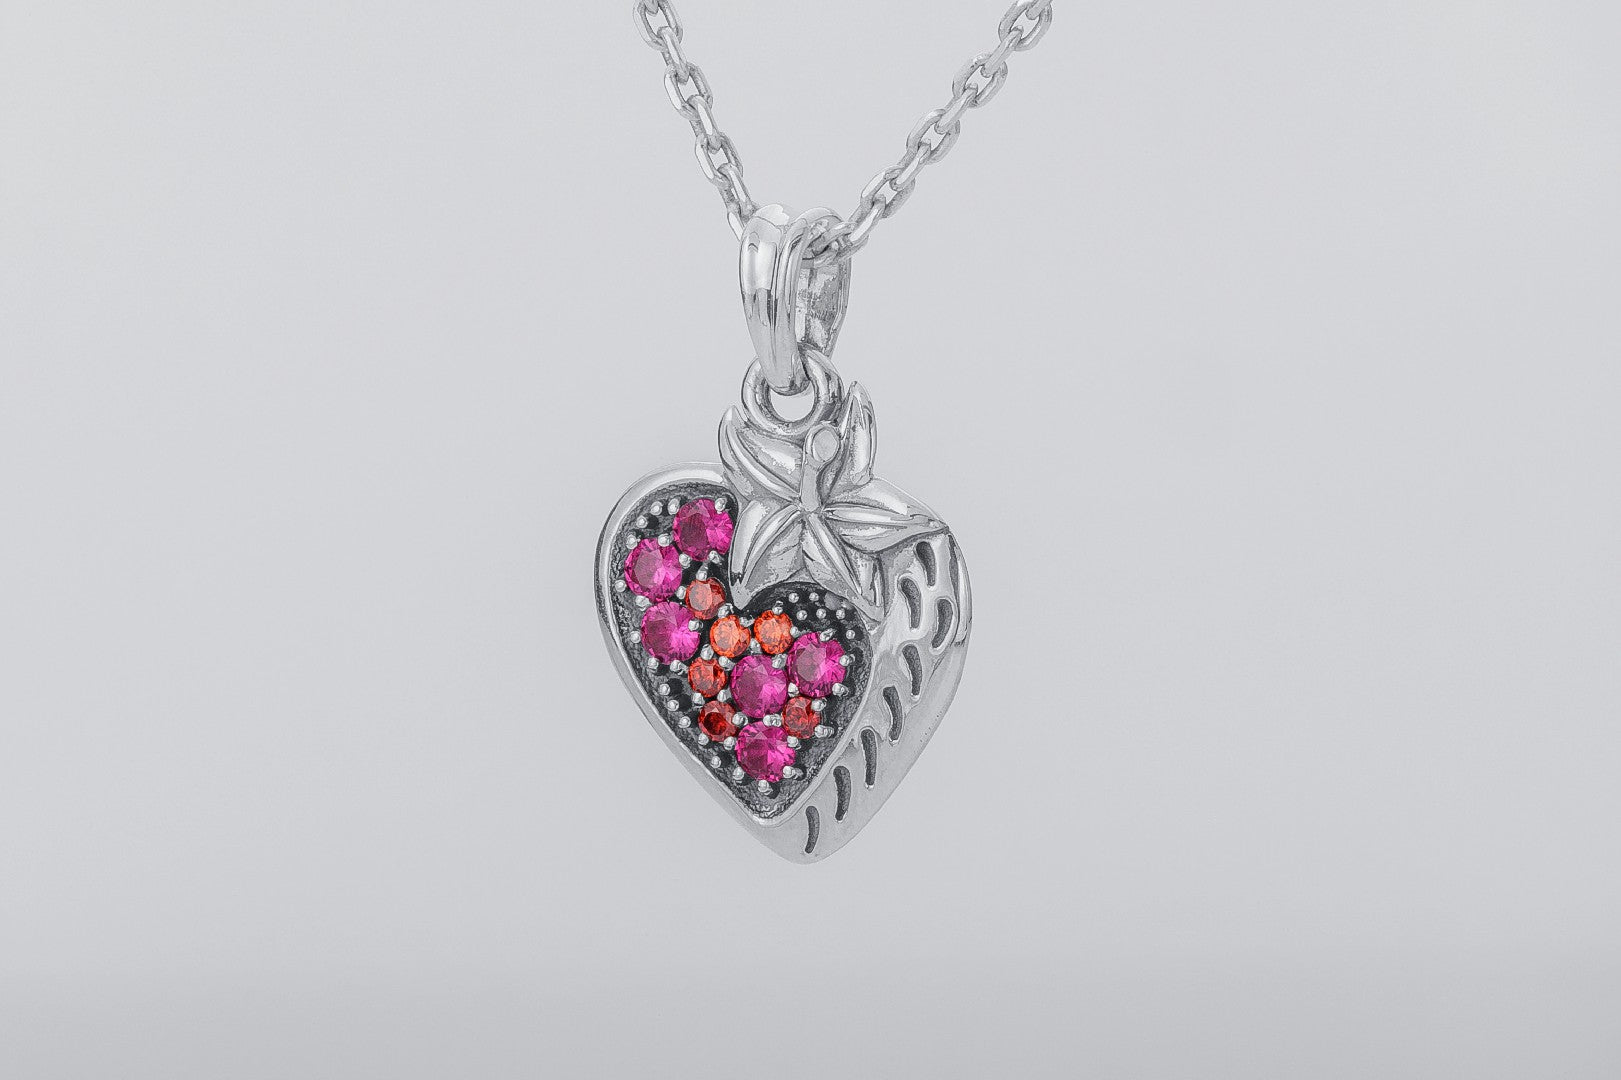 Strawberry Pendant with Gems, 925 Silver